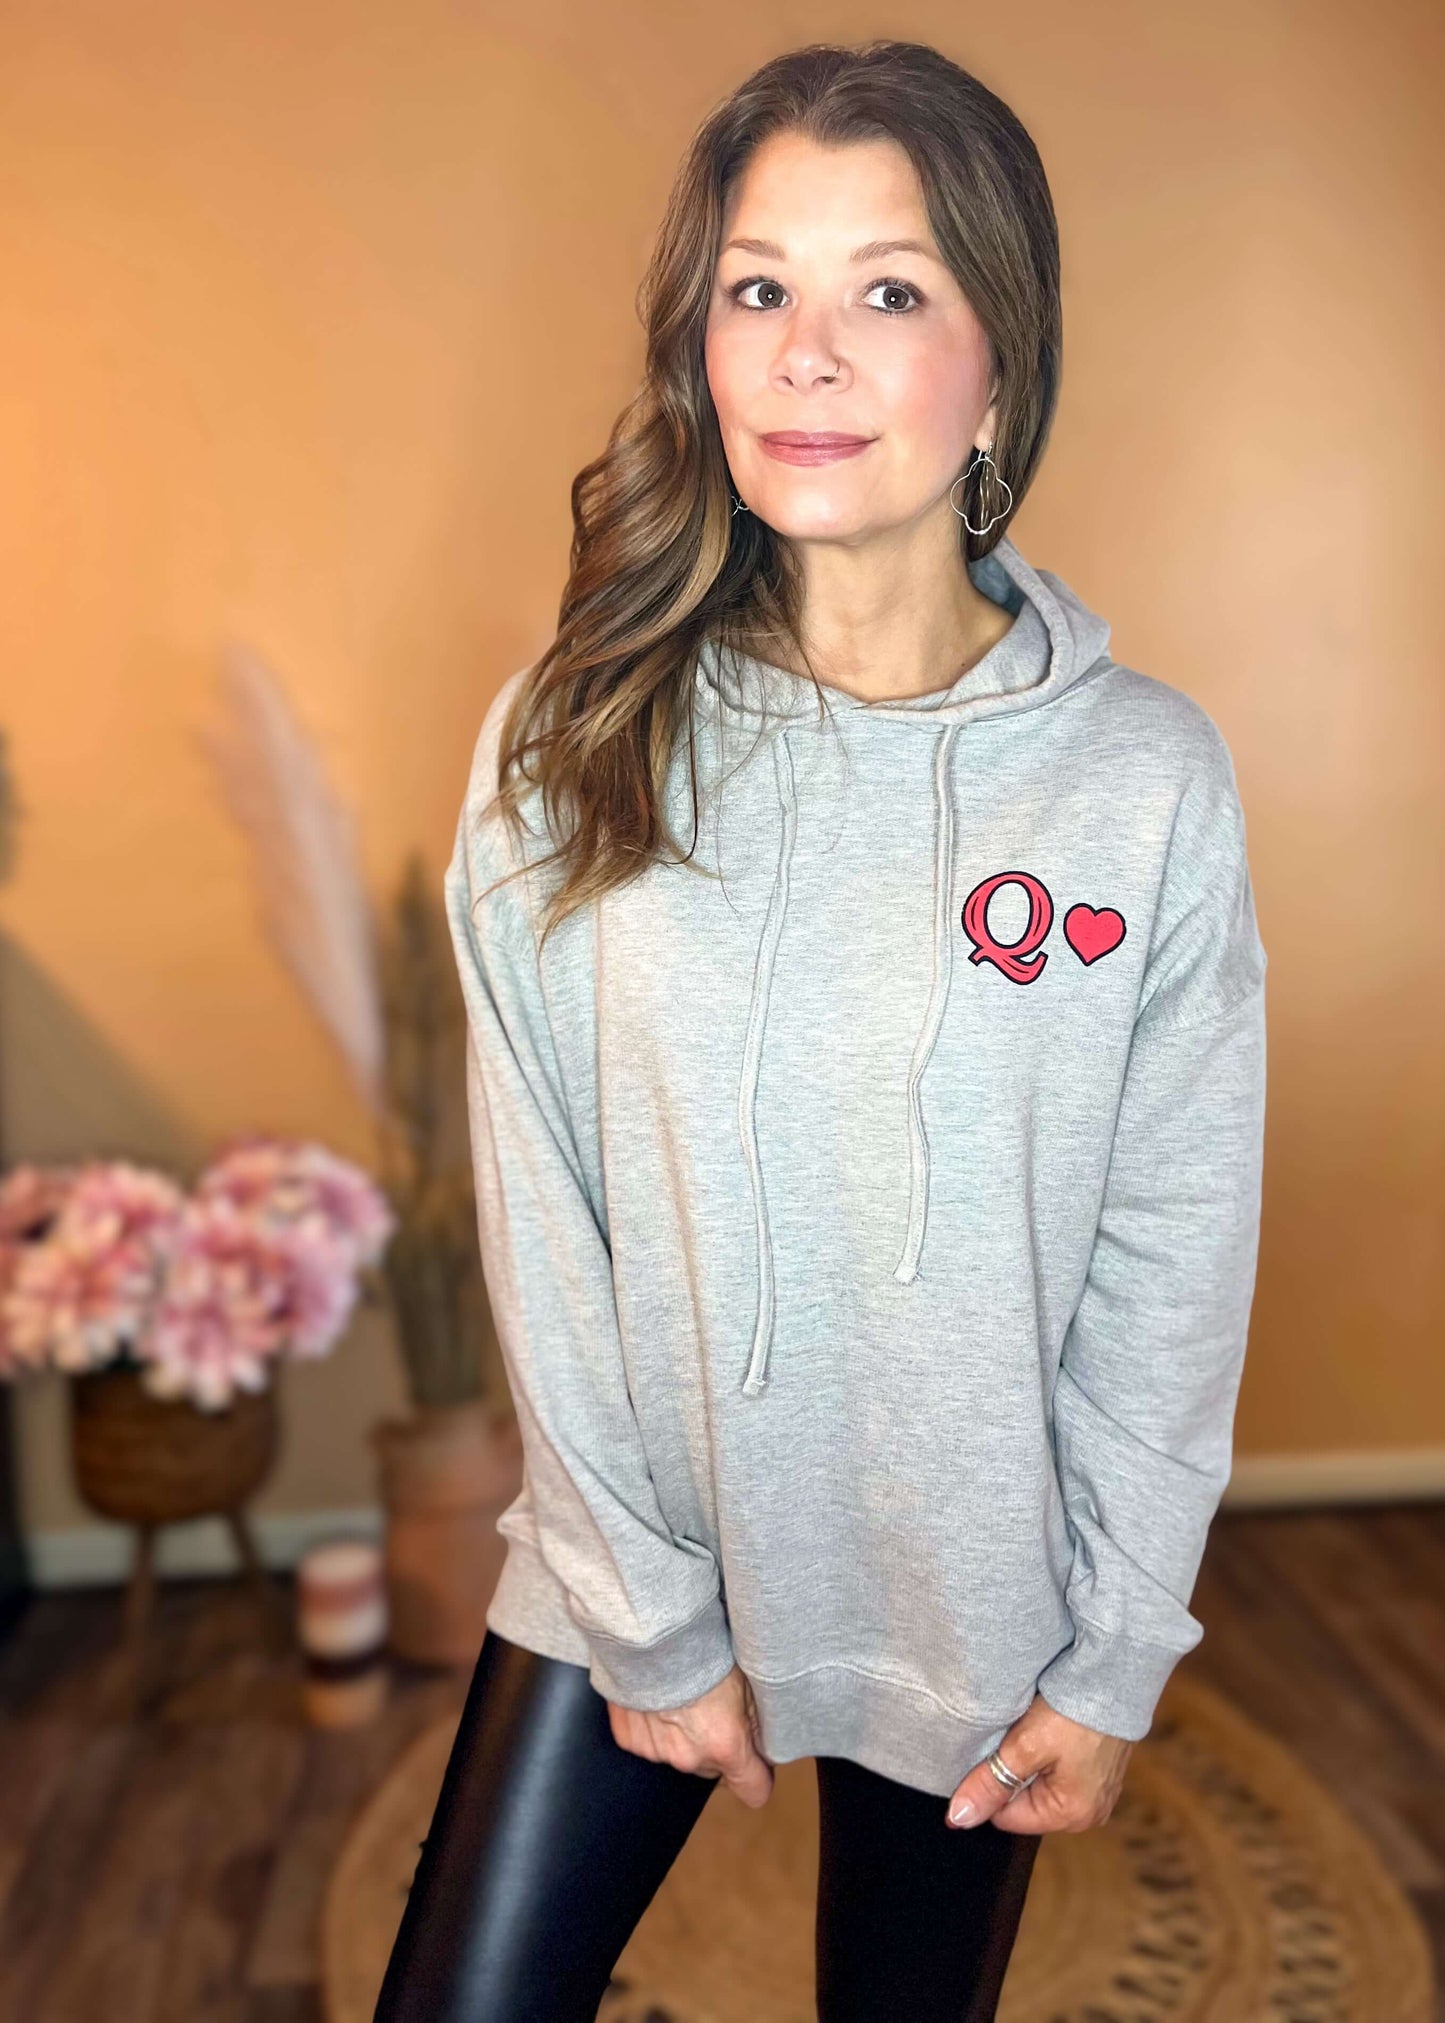 Q with heart graphic on front chest hoodie